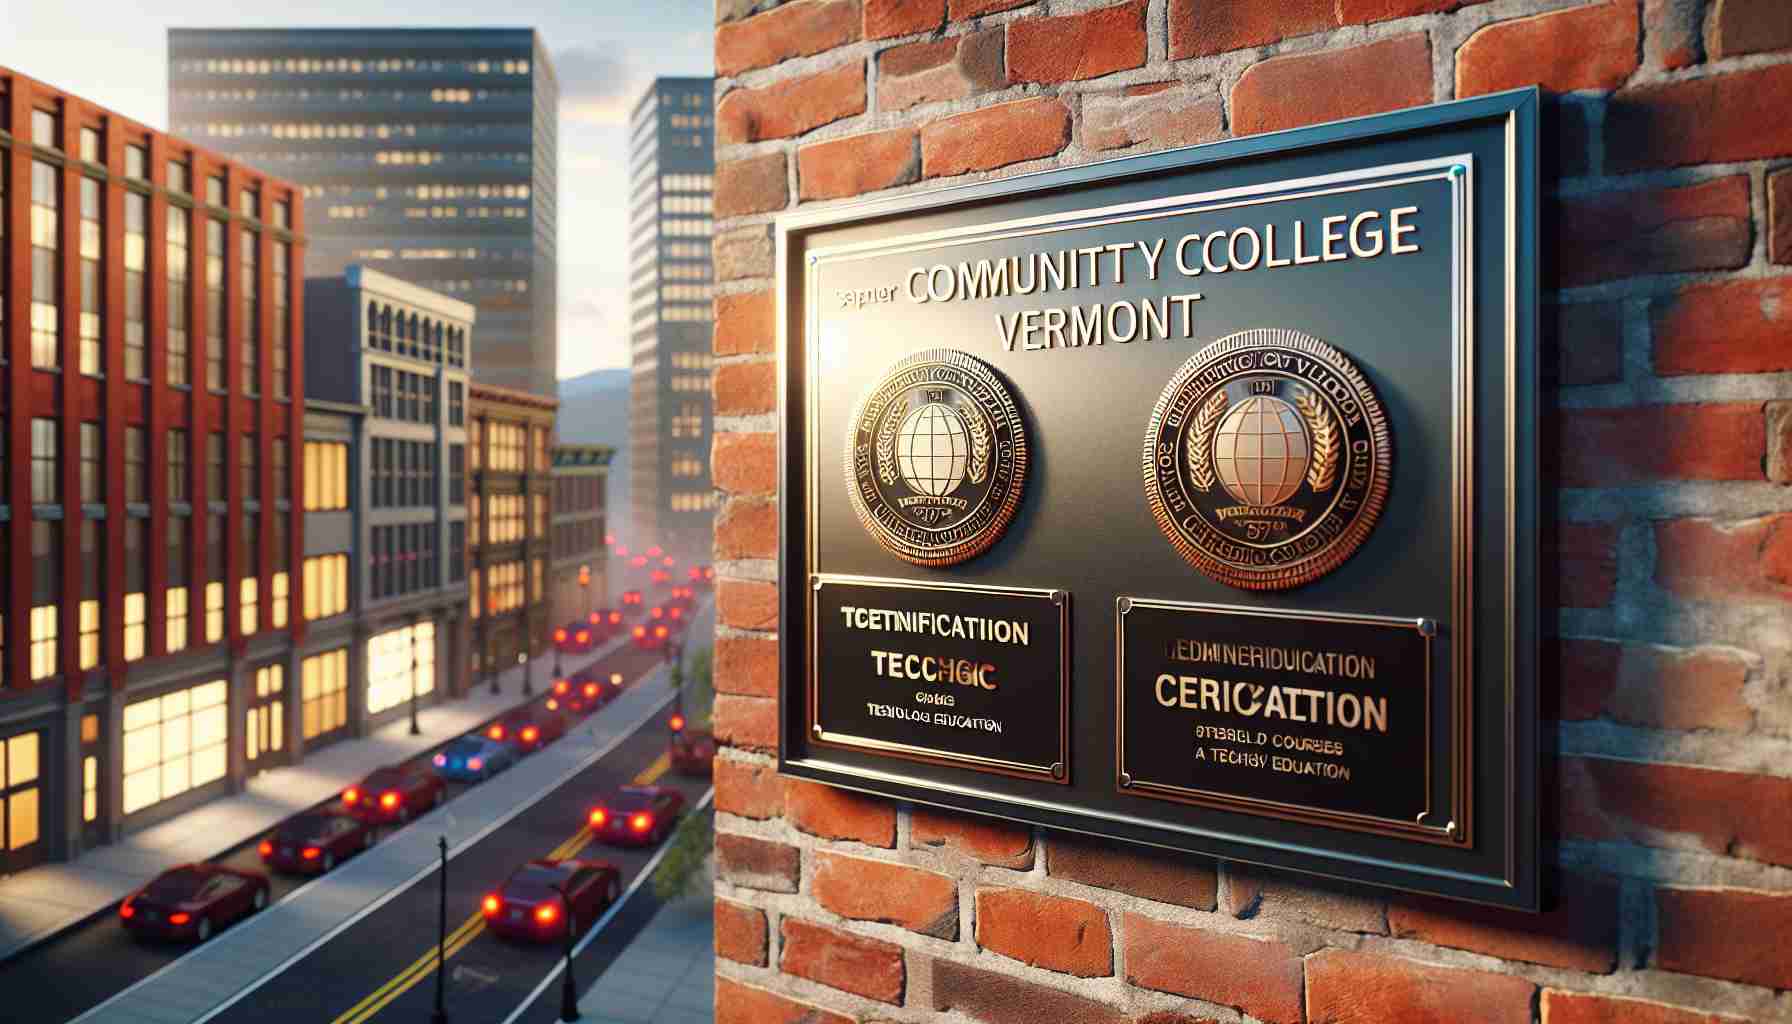 Community College of Vermont Expands Tech Education with Two New Certificates